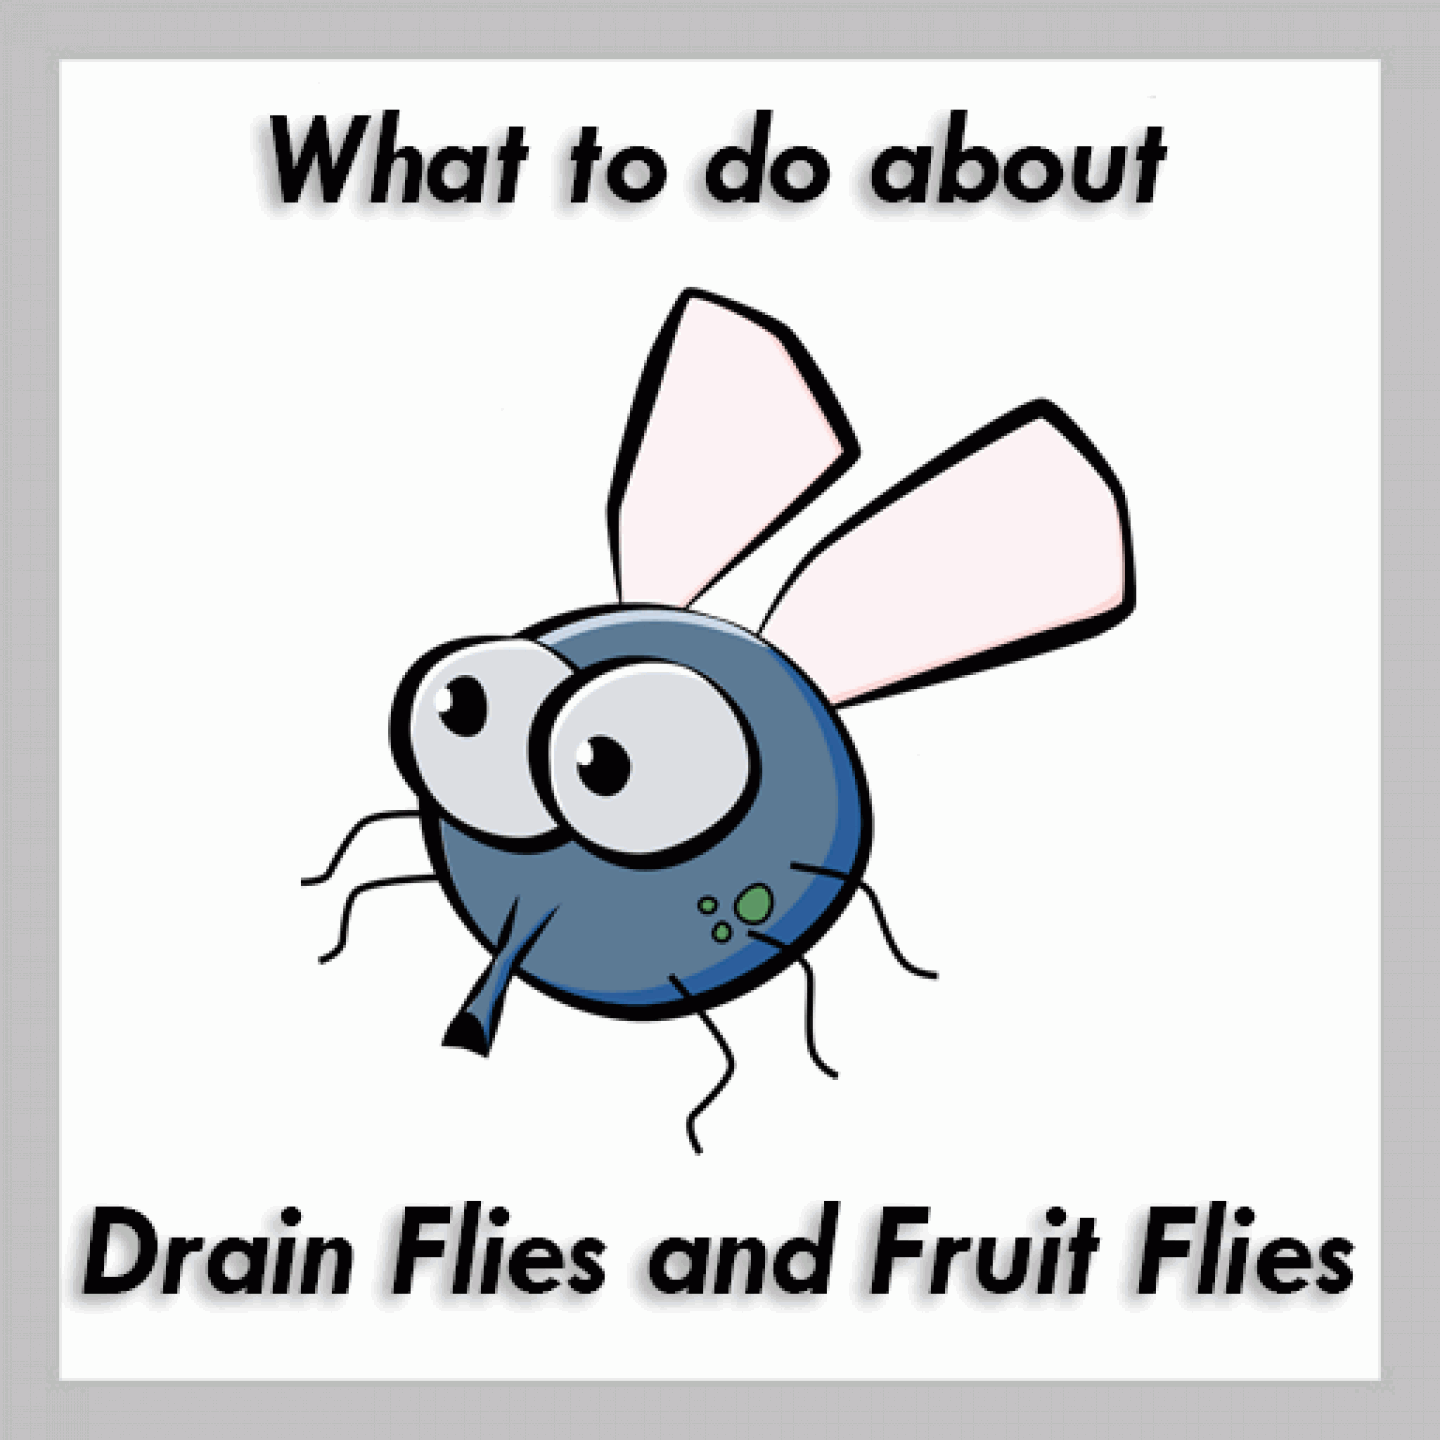 what to do about fruit flies and drain flies